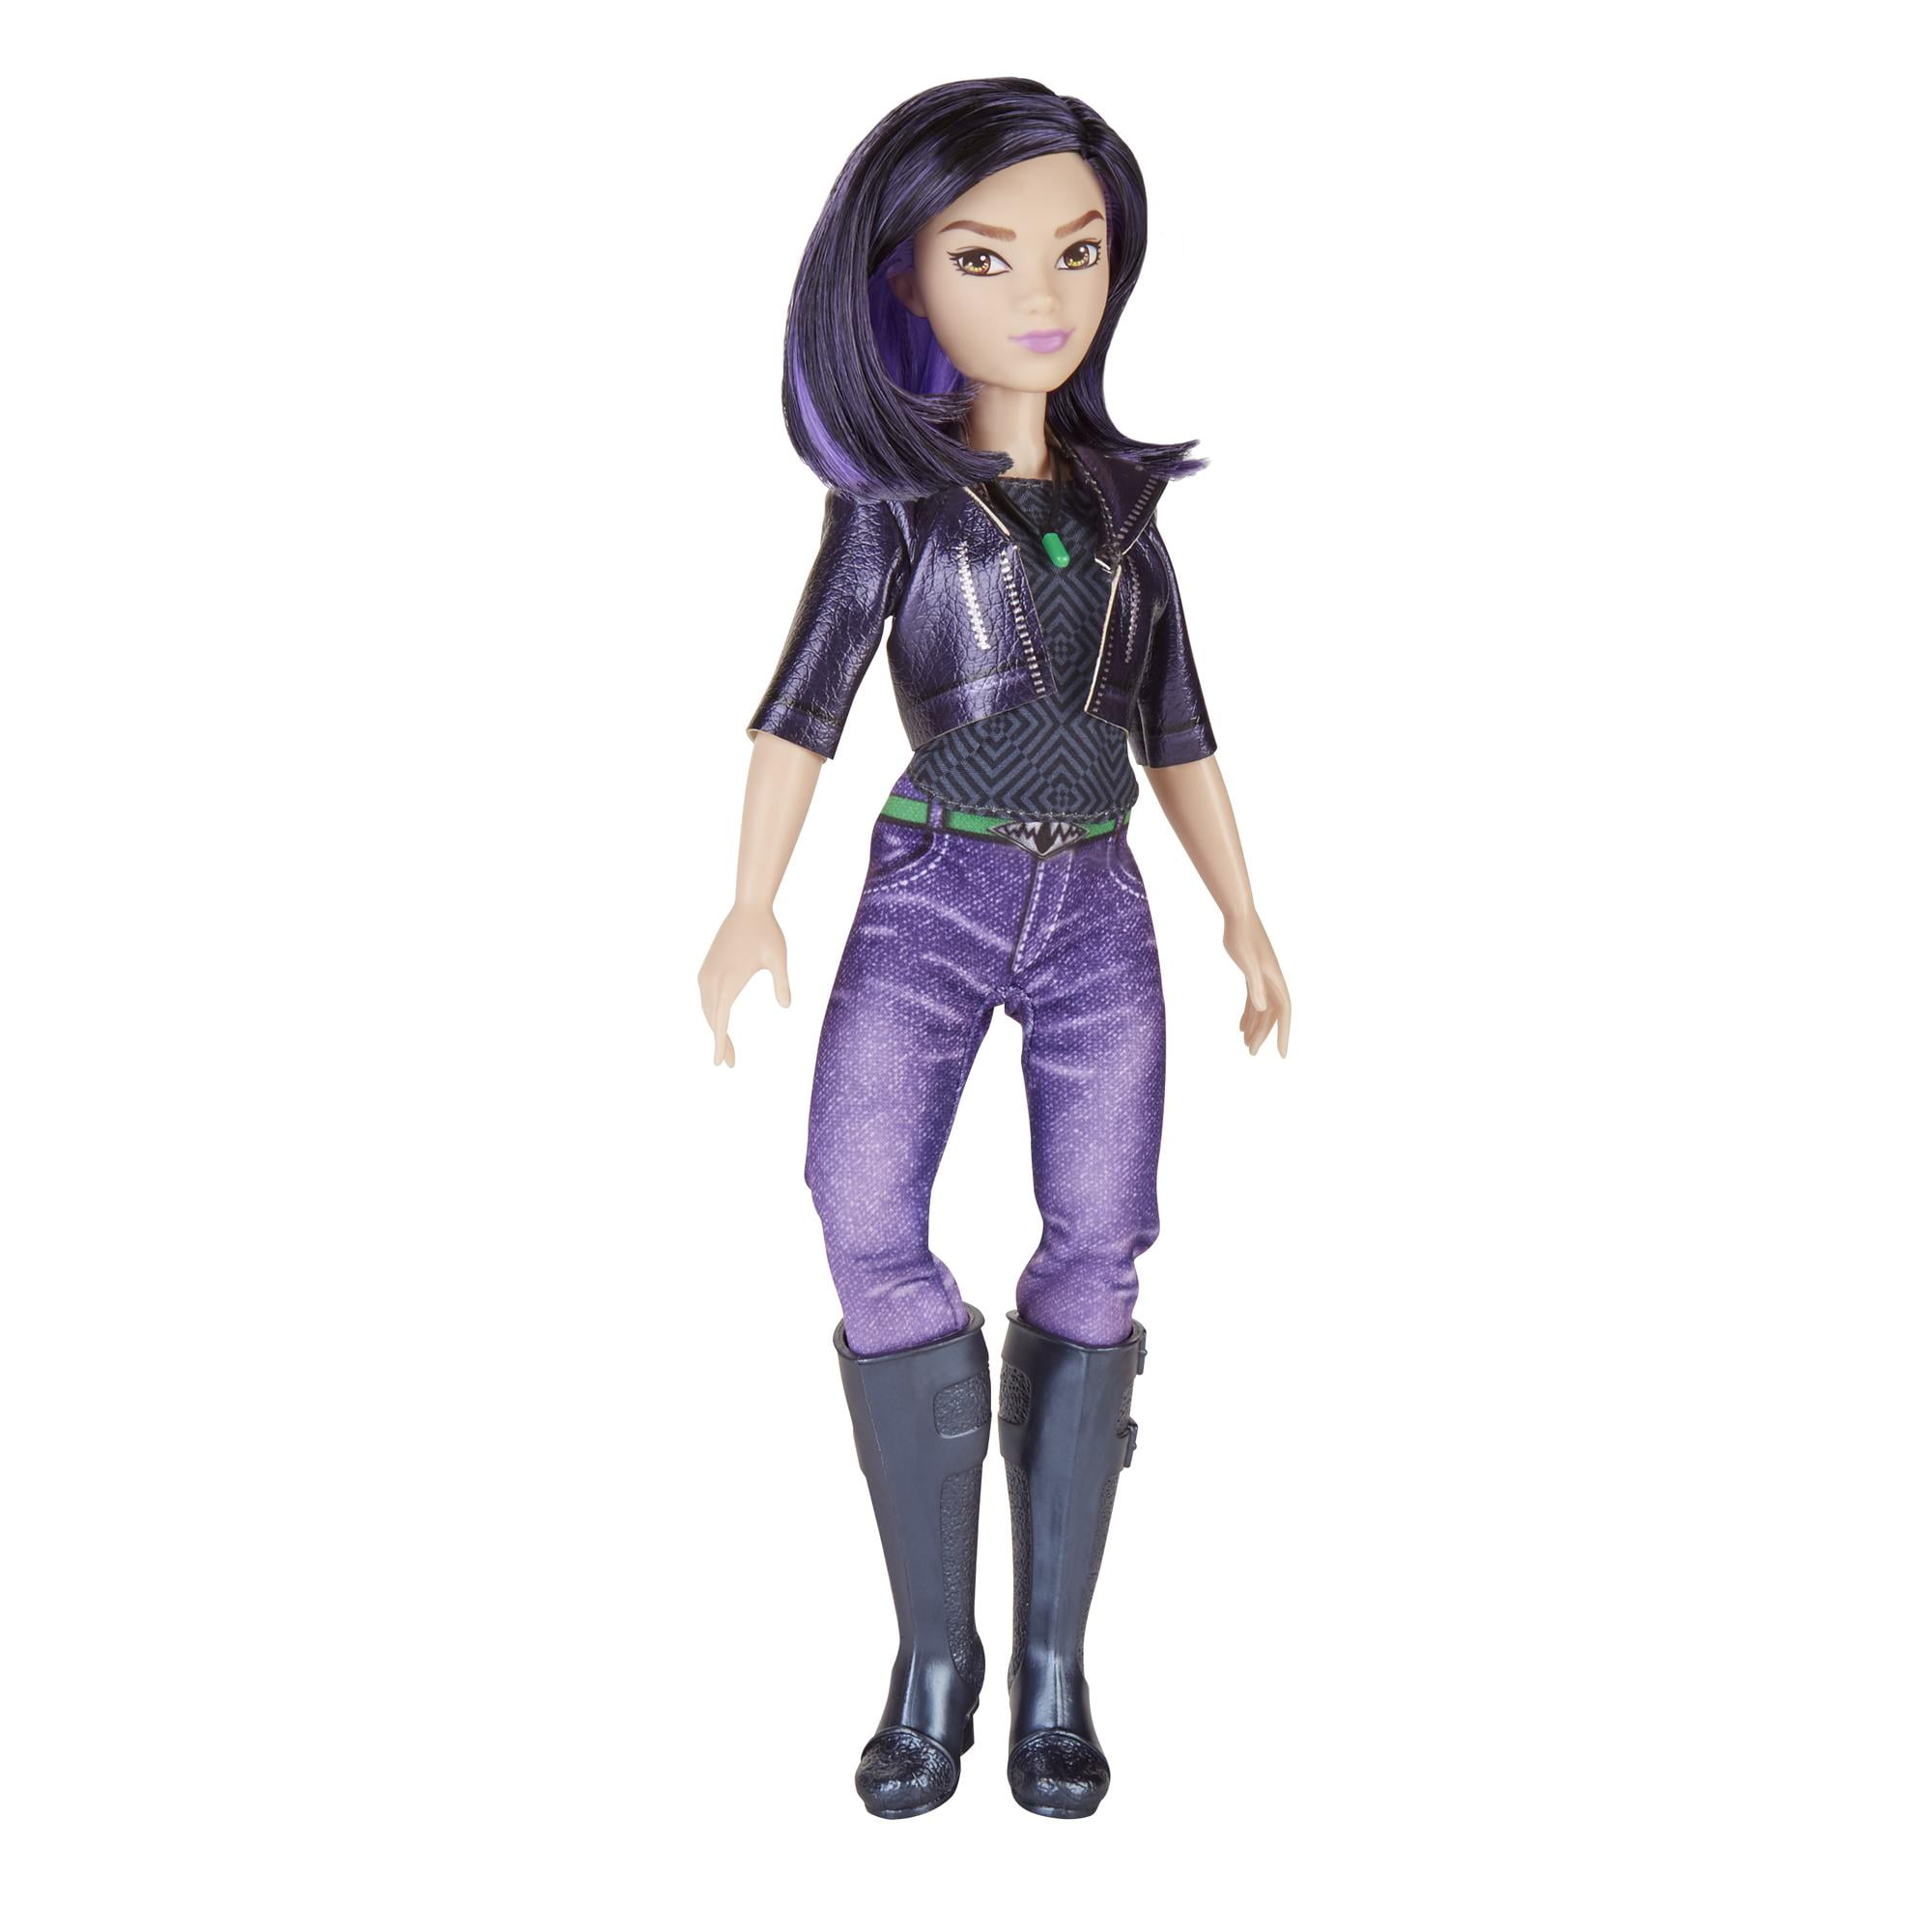 Toy Play Girls Gift Marvel Captain Starforce Super Hero Doll with Helmet Ages 6 